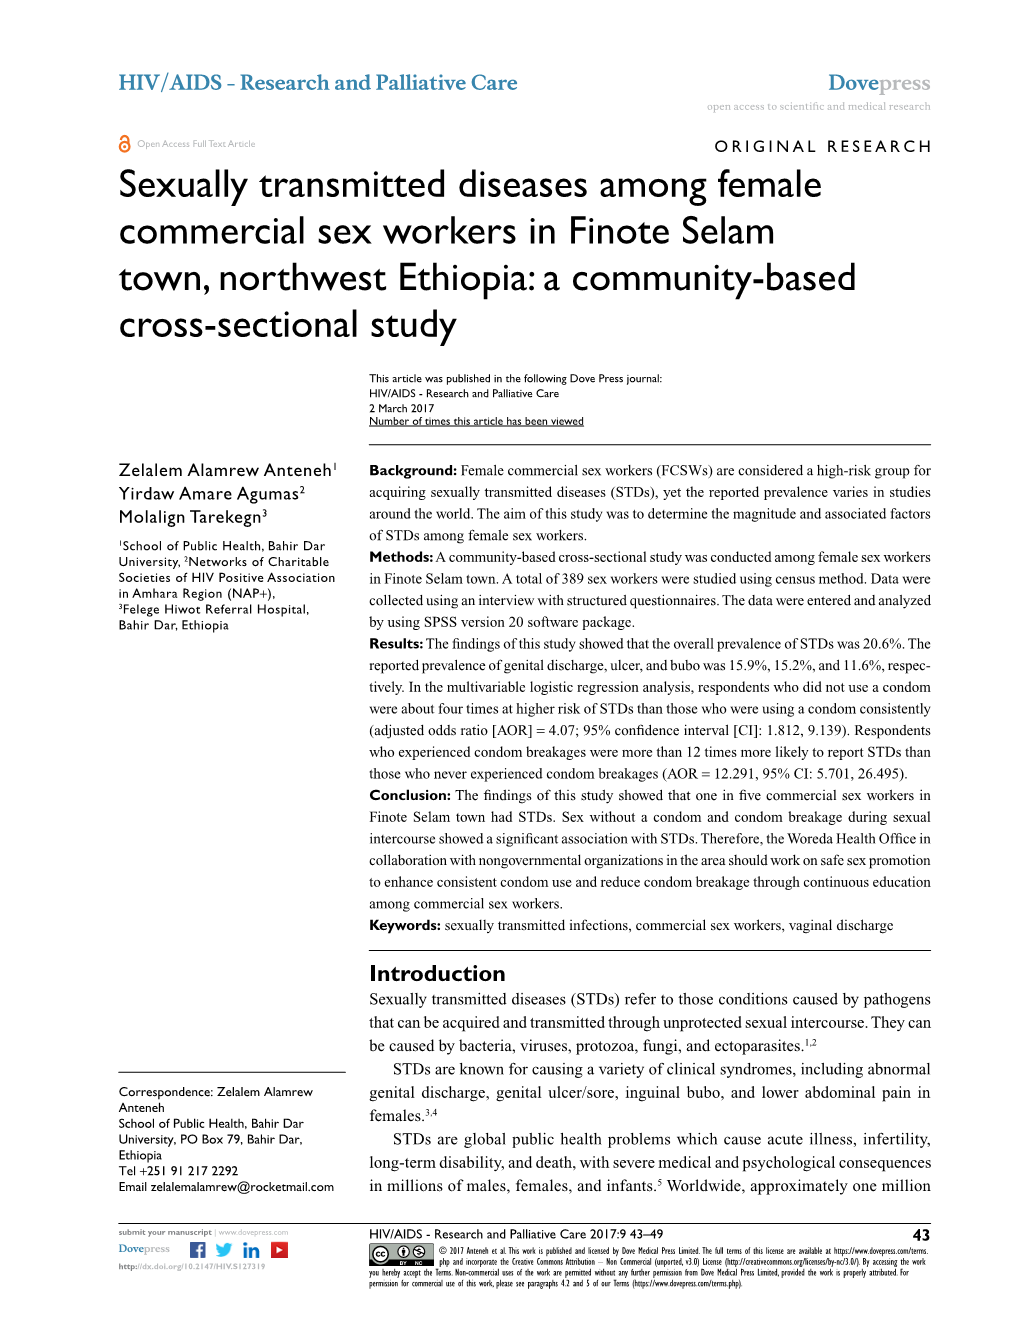 Sexually Transmitted Diseases Among Female Commercial Sex Workers in Finote Selam Town, Northwest Ethiopia: a Community-Based Cross‑Sectional Study